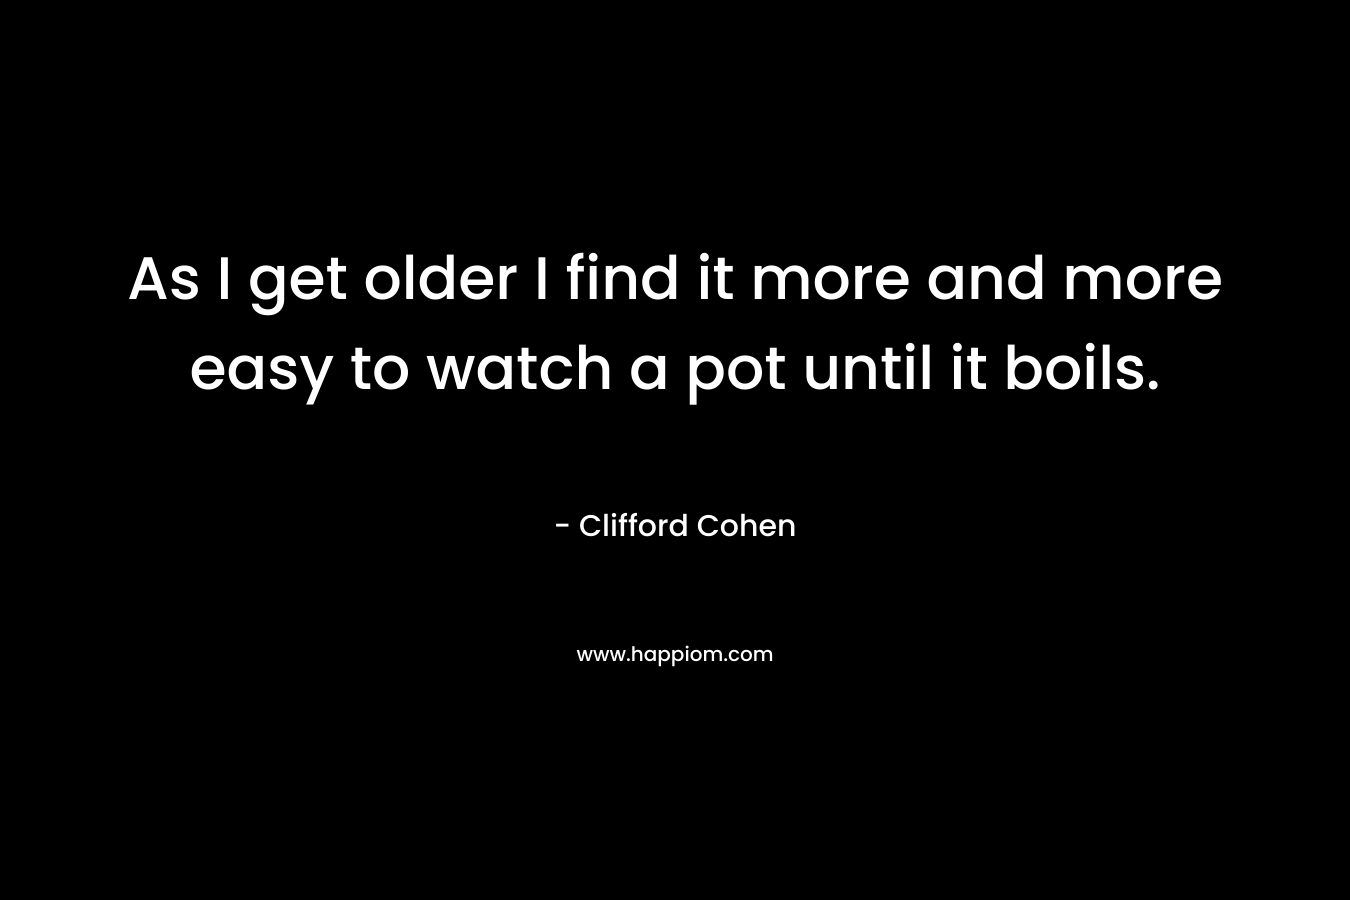 As I get older I find it more and more easy to watch a pot until it boils. – Clifford Cohen